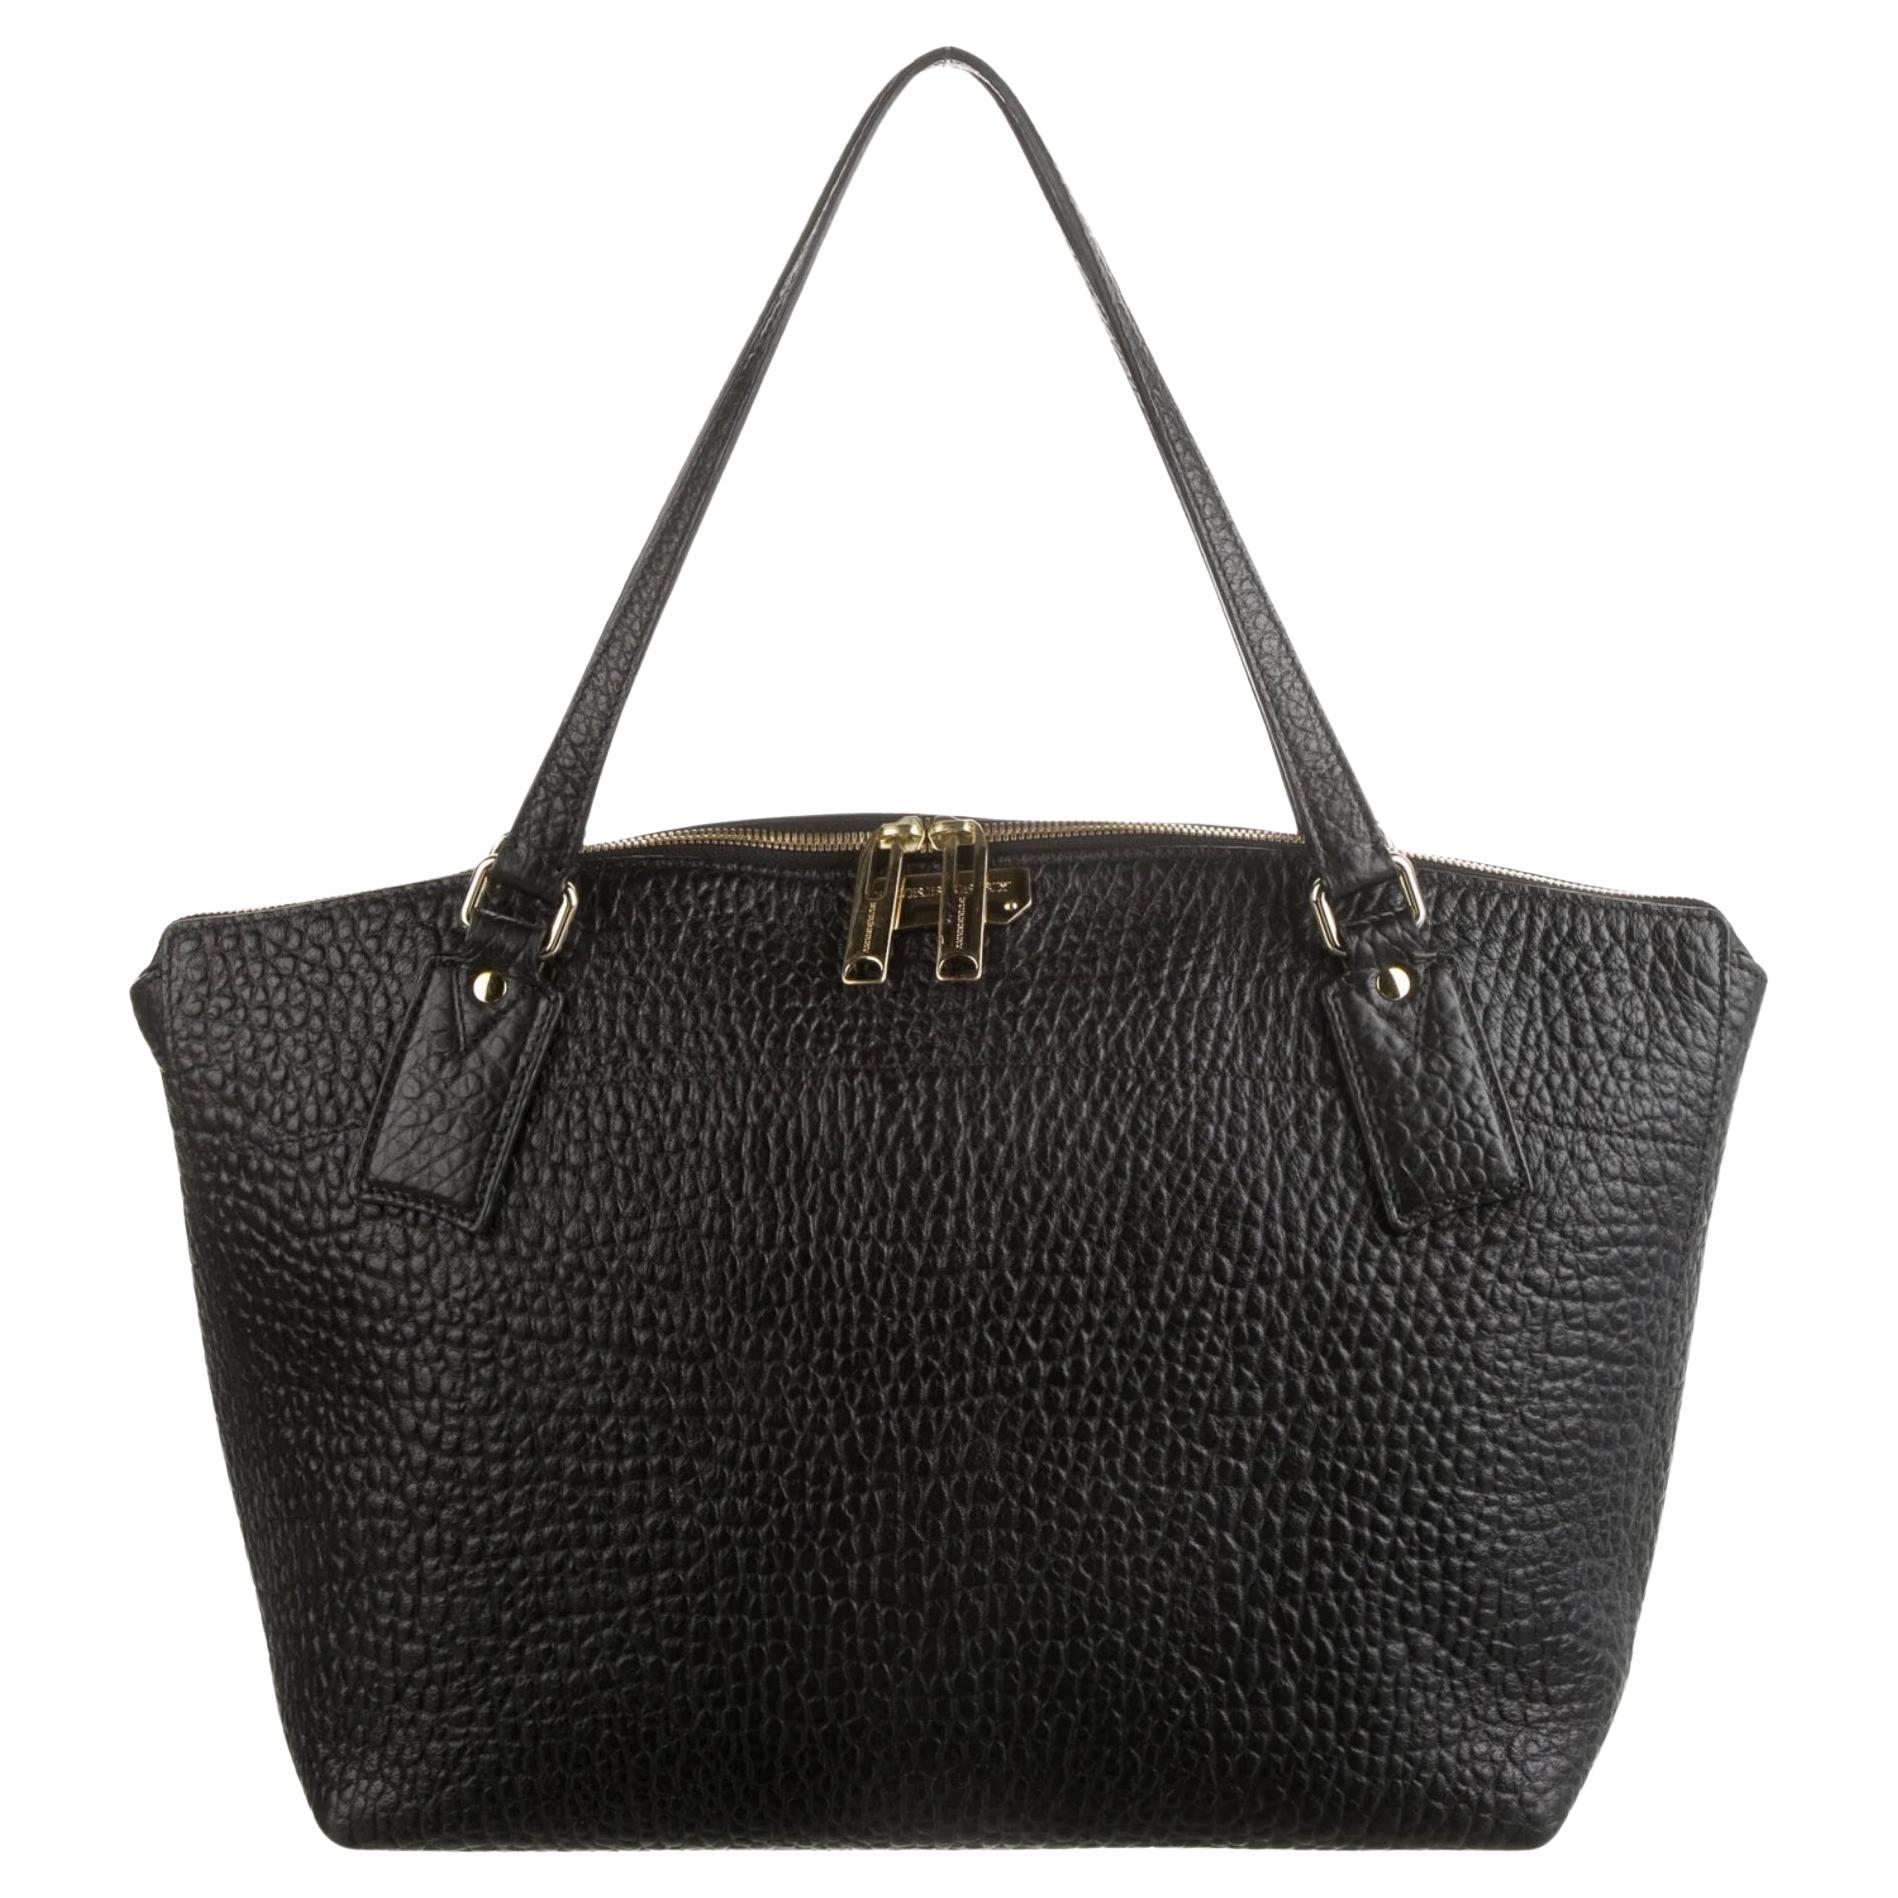 Burberry Grained Leather Black Tote Bag Bag Black For Sale